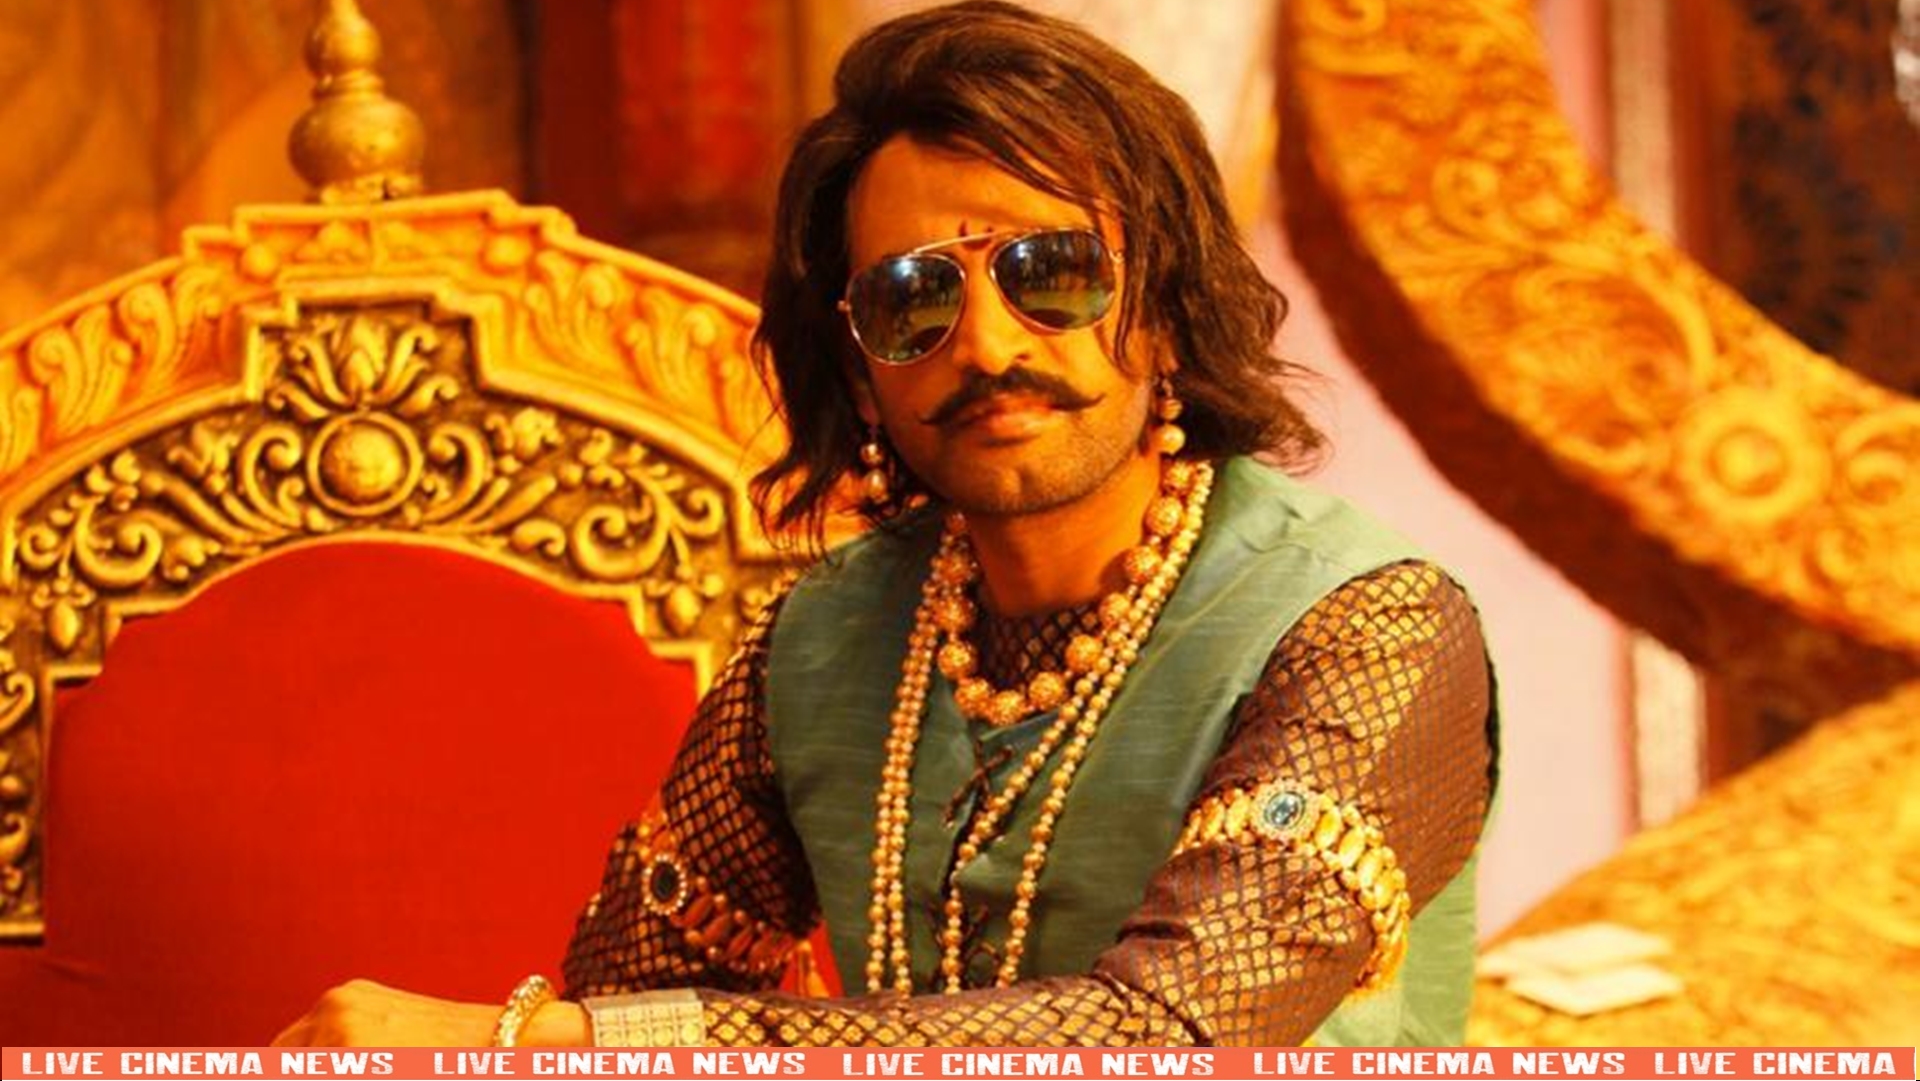 Santhanam in the role of king